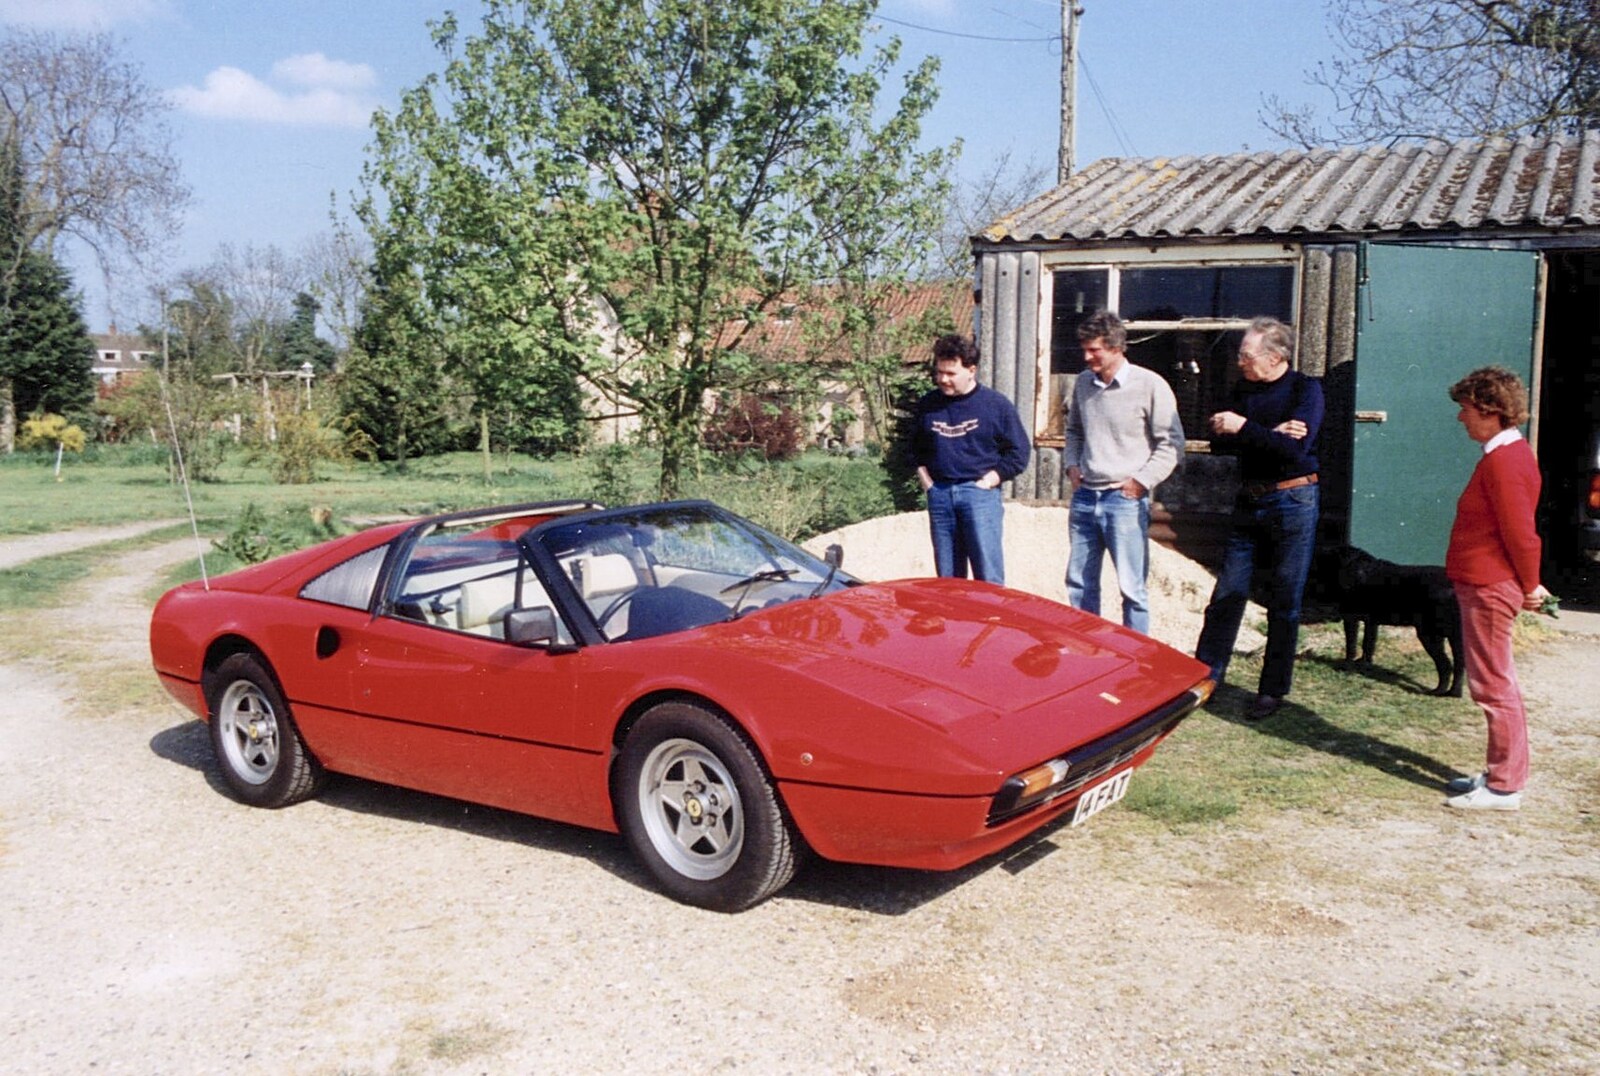 The Ferrari by Geoff's sheds from The Newmarket Dog Show and Dobermans on the Ling, Newmarket and Wortham, Suffolk - 3rd April 1991